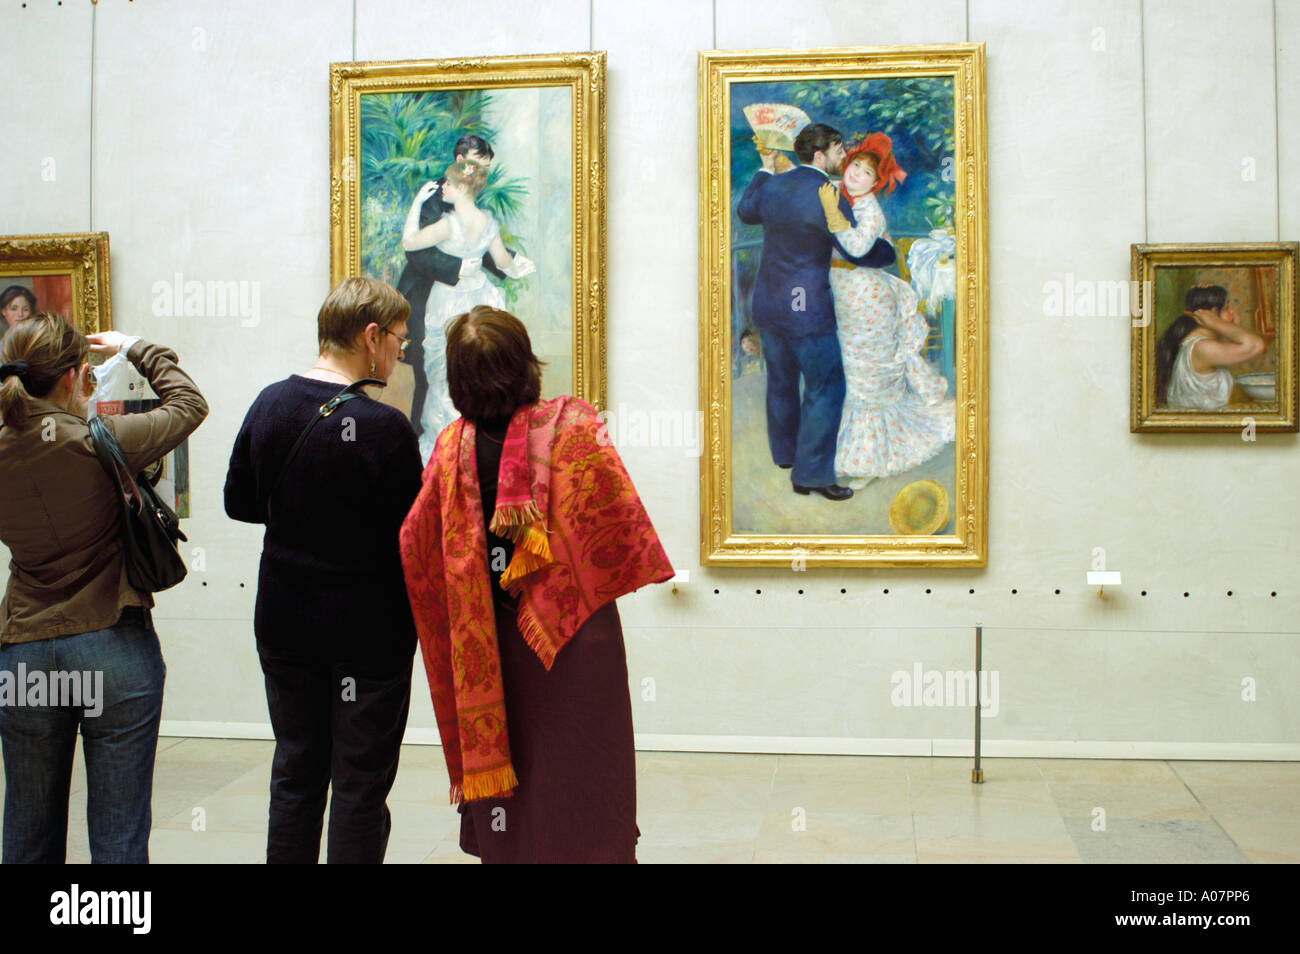 Women Looking at Paintings Paris France Interior 'French Impressionist Paintings' Gallery Orsay Museum, Musee d'Orsay, Renoir, Paris, fine art Stock Photo